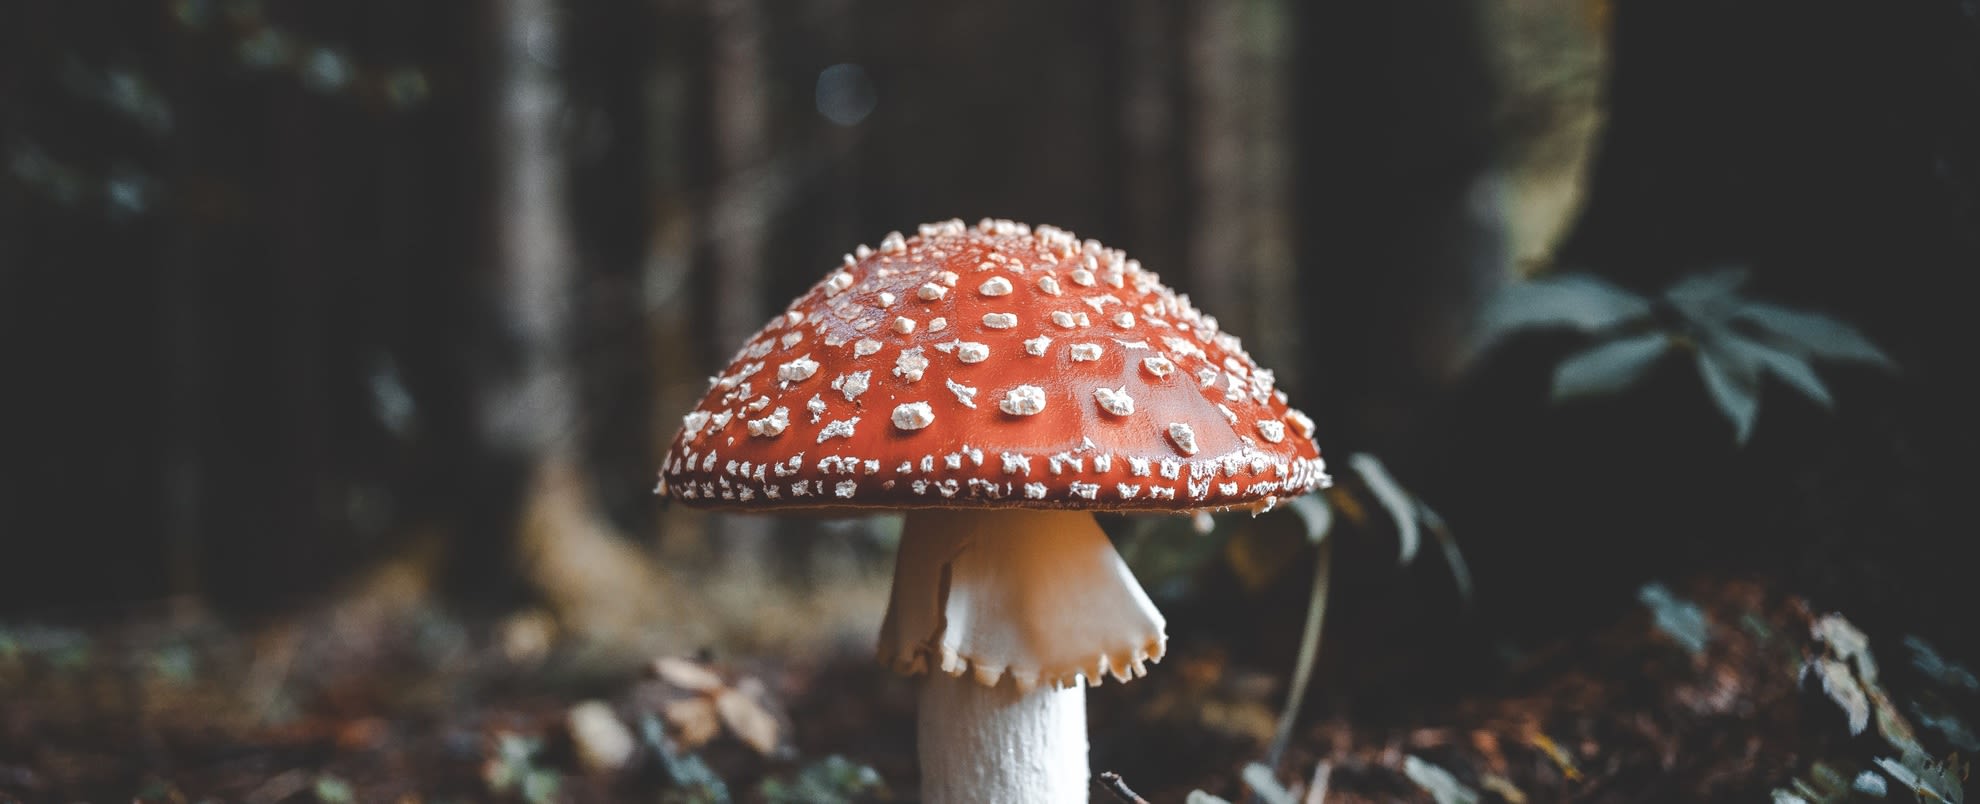 Close up of a red mushroom with white spots